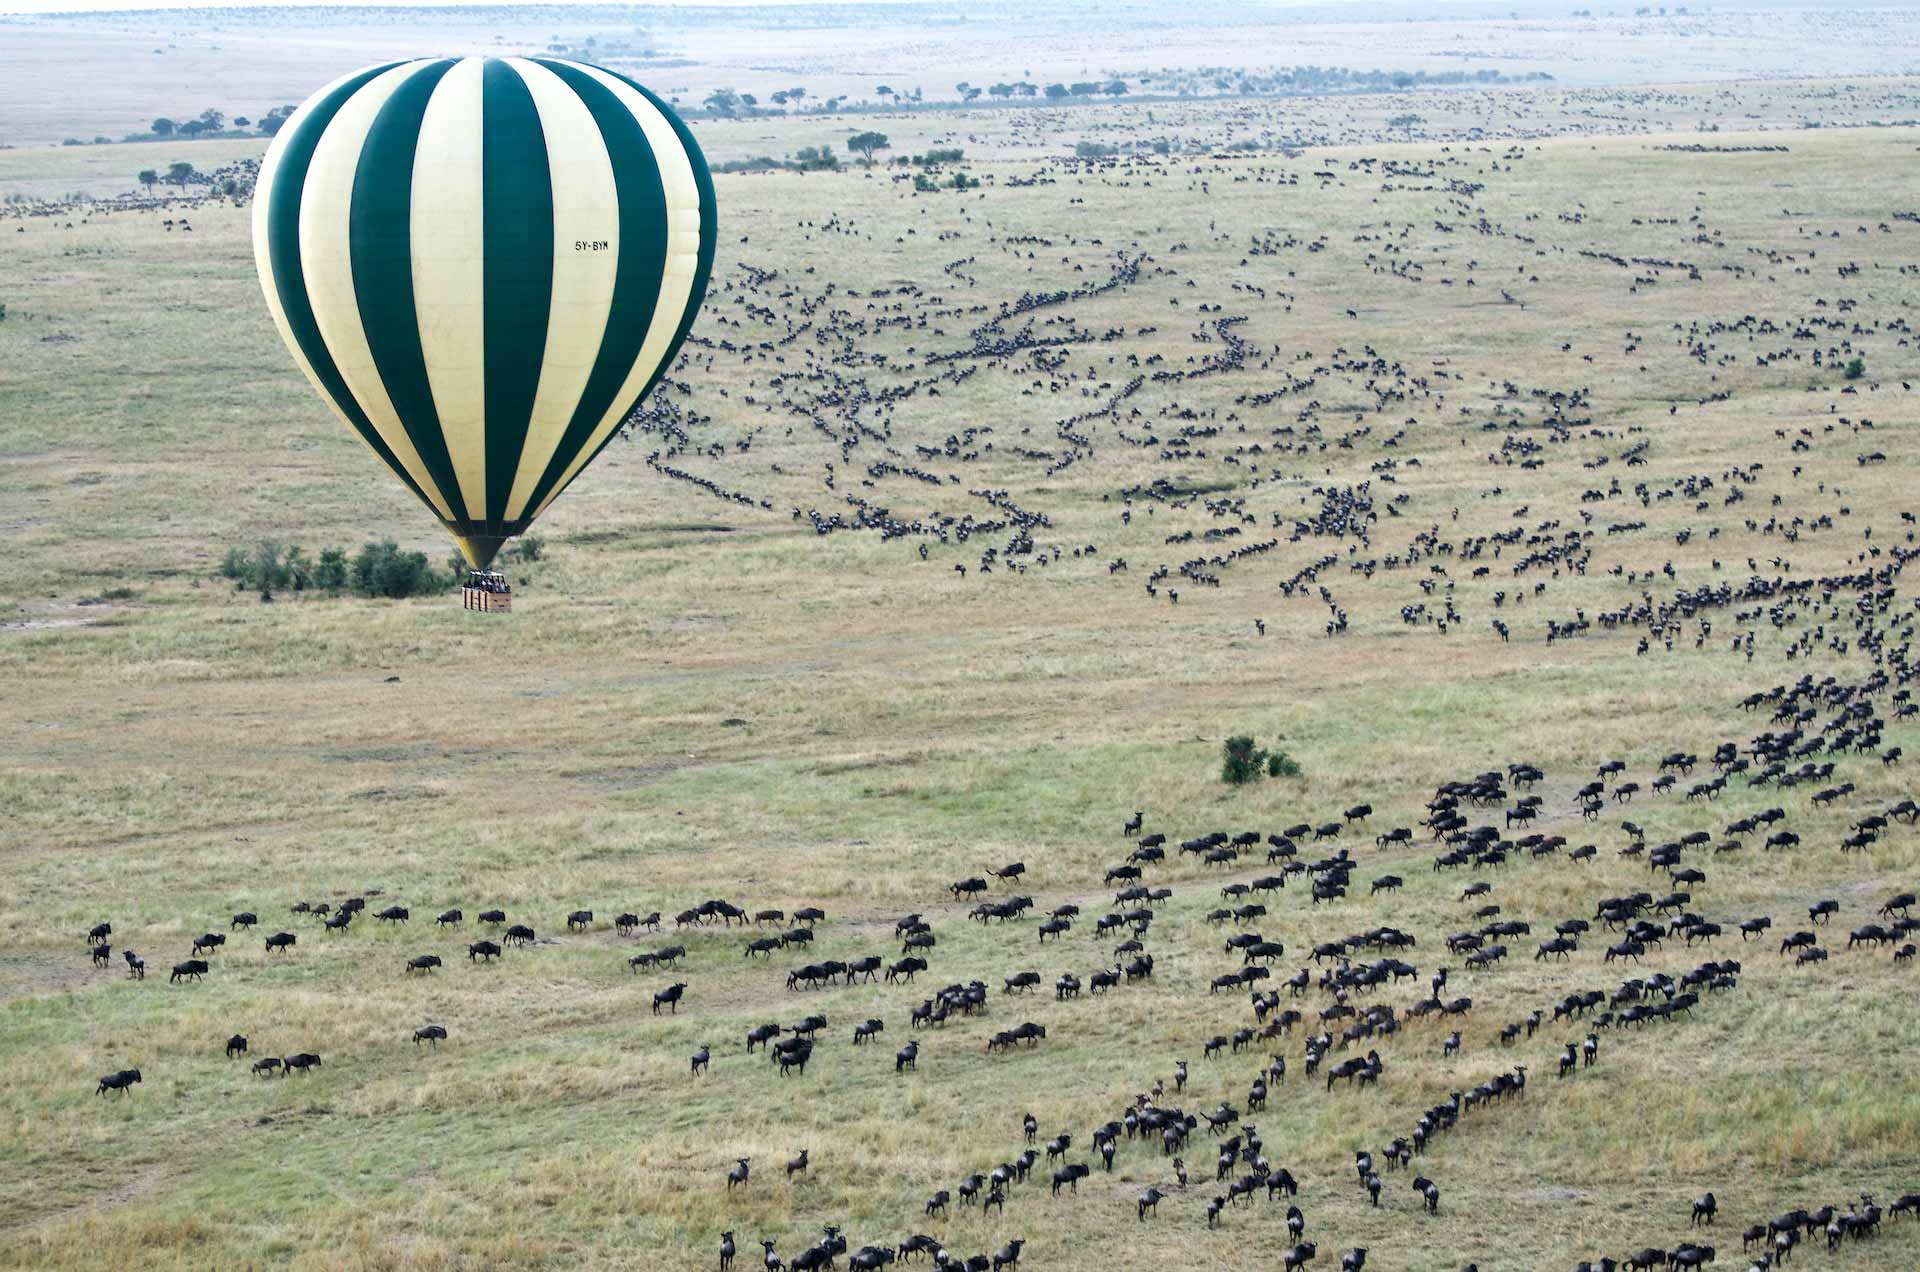 A lone hot air balloon over a herd of wildebeest over the Masai Mara in Kenya.